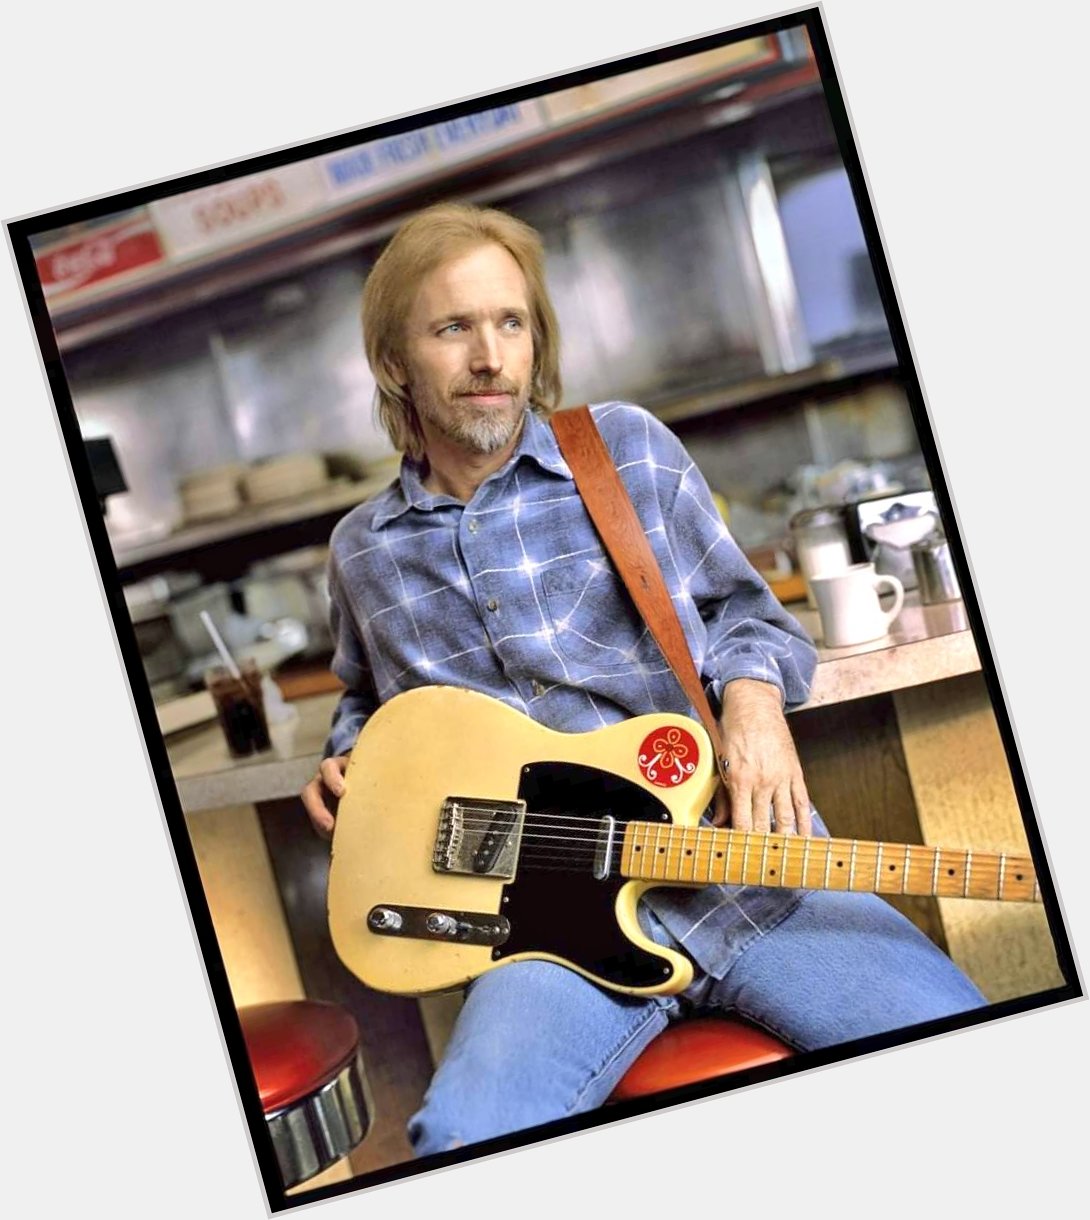 Happy birthday Tom Petty, music misses you   What song of him would you choose to play today? 